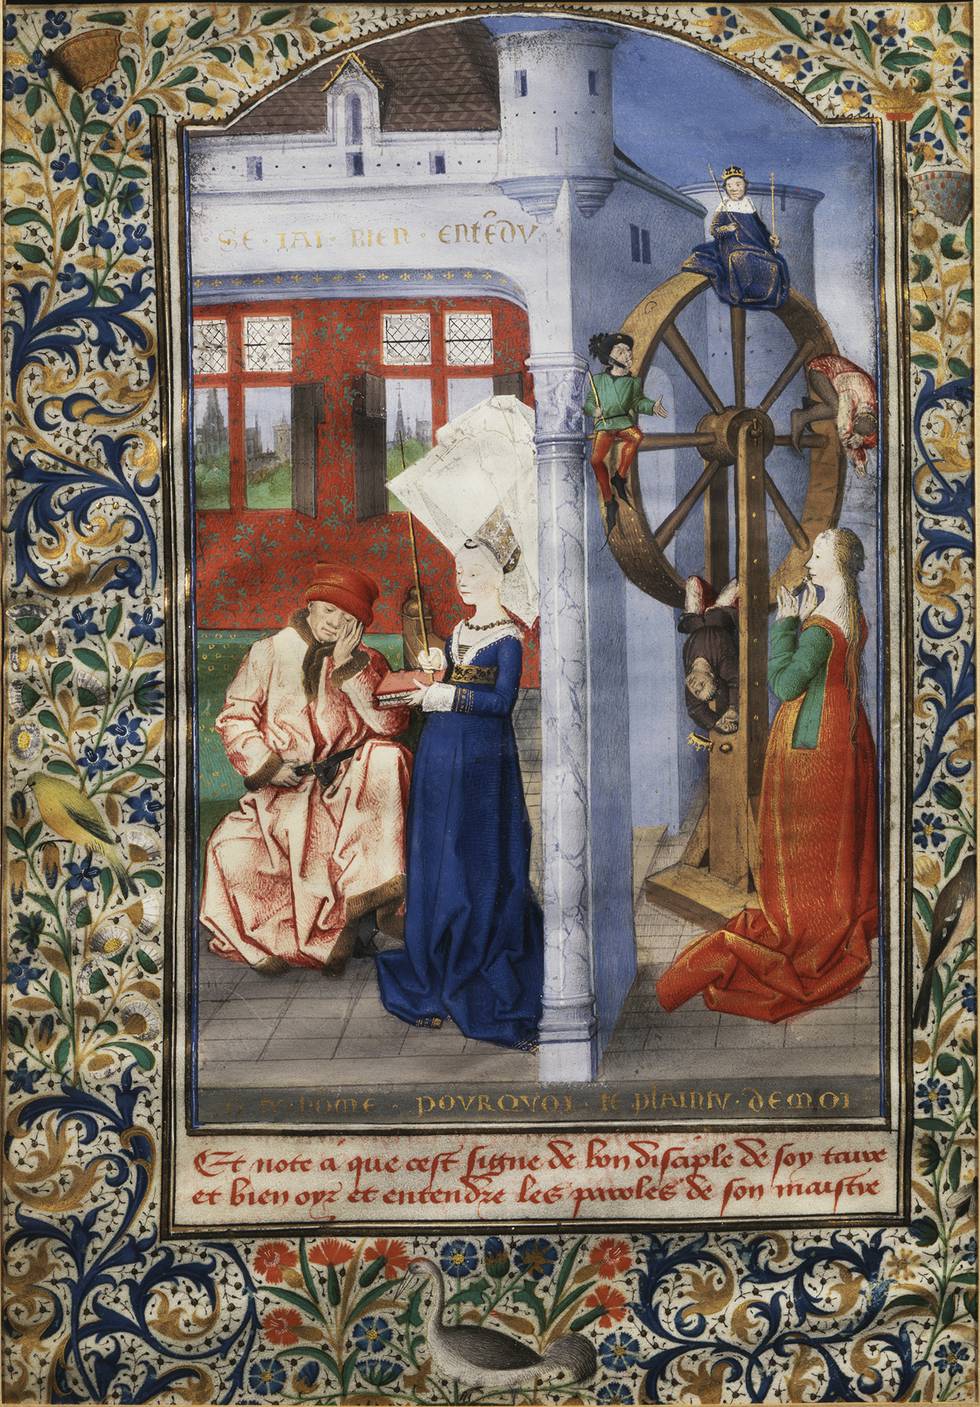 An image of an illuminated manuscript showing three figures and a wheel of fortune